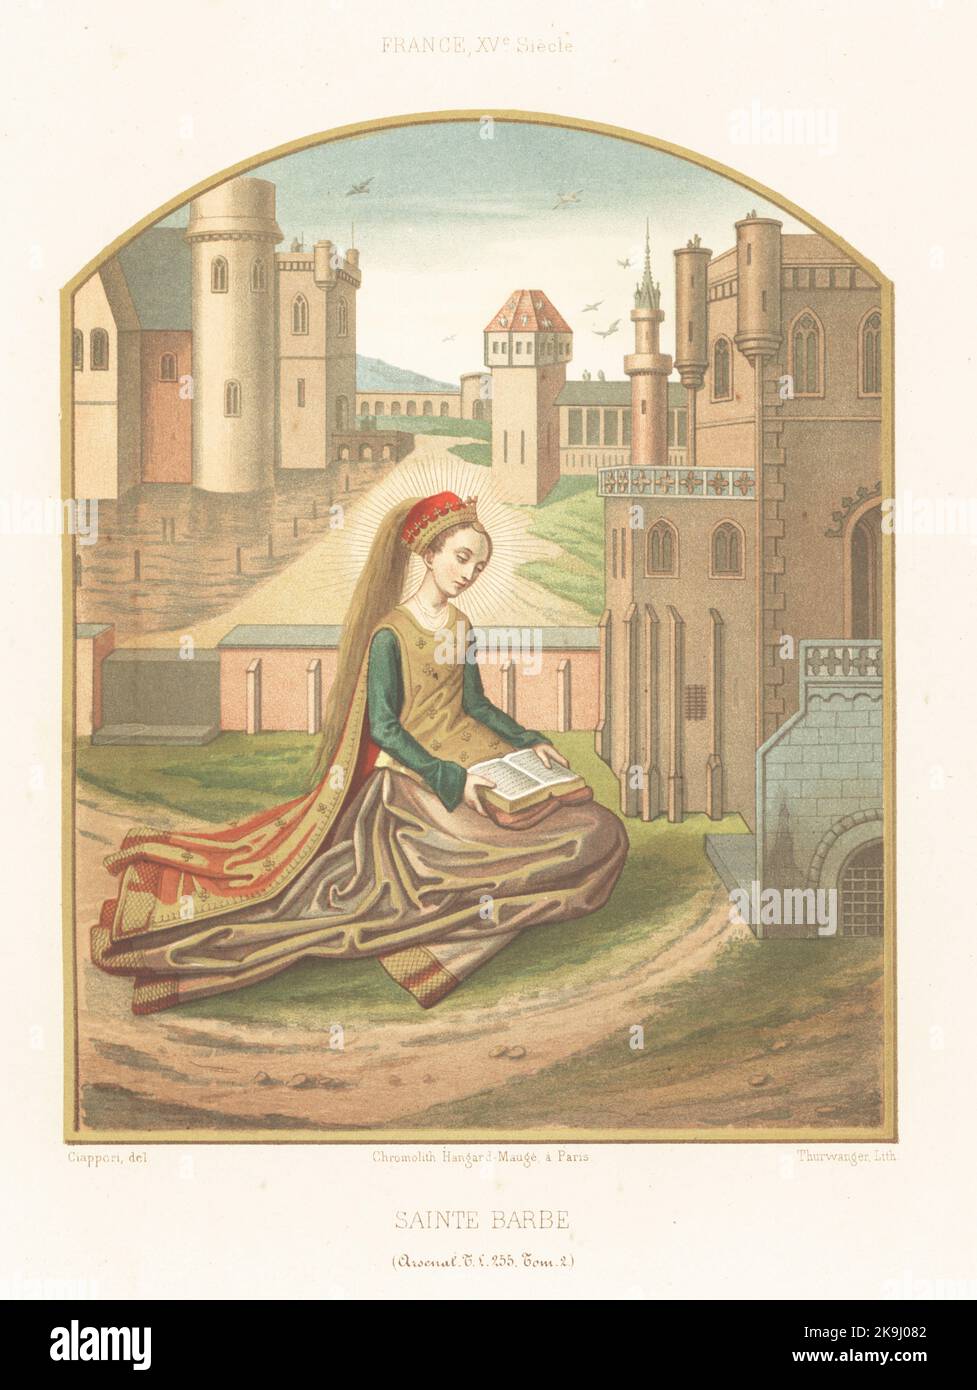 Saint Barbara, virgin martyr, patron saint of explosives, 3rd century. In crown and velvet gown, reading a Bible near a town with a round tower with three windows. In 15th century French costume. Saint Barbe, XVe siecle. Taken from a Book of Hours, livre d'heures, MS Tl 255, Tom. 2, Bibliotheque de l'Arsenal. Chromolithograph by Thurwanger after an illustration by Claudius Joseph Ciappori from Charles Louandre’s Les Arts Somptuaires, The Sumptuary Arts, Hangard-Mauge, Paris, 1858. Stock Photo